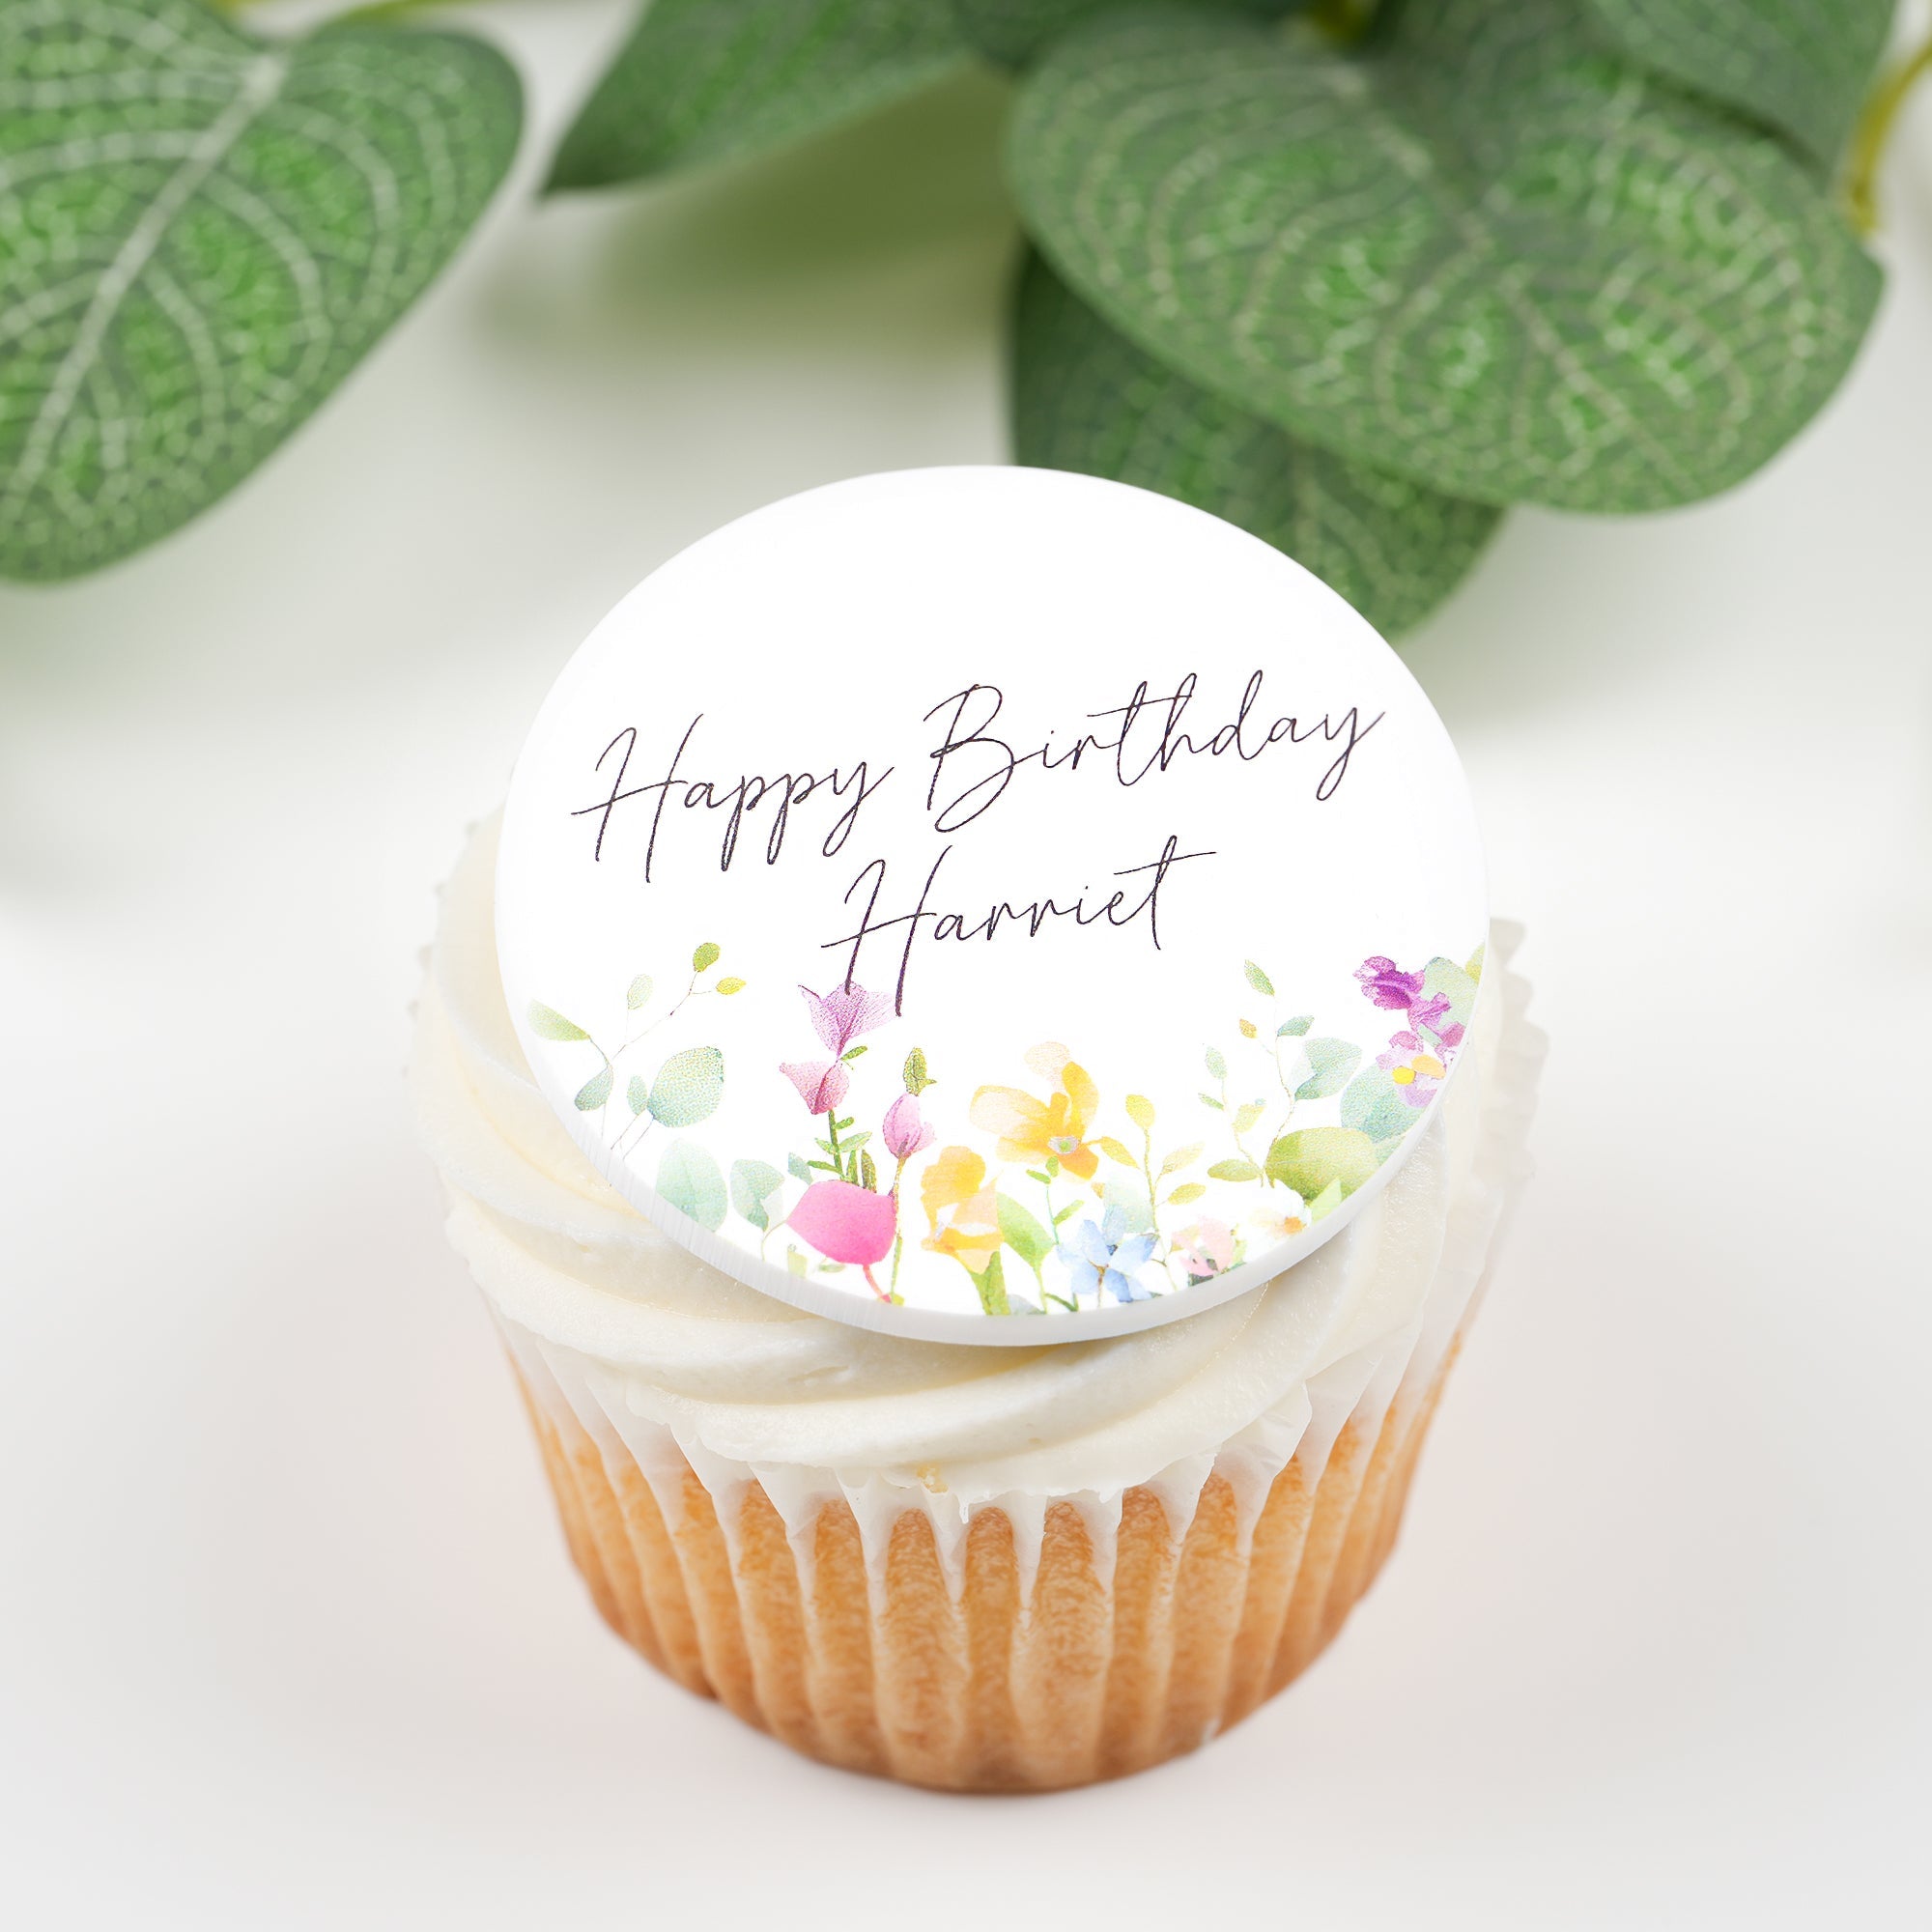 Personalised Acrylic Happy Birthday Cupcake Topper Decoration - Cupcake Topper